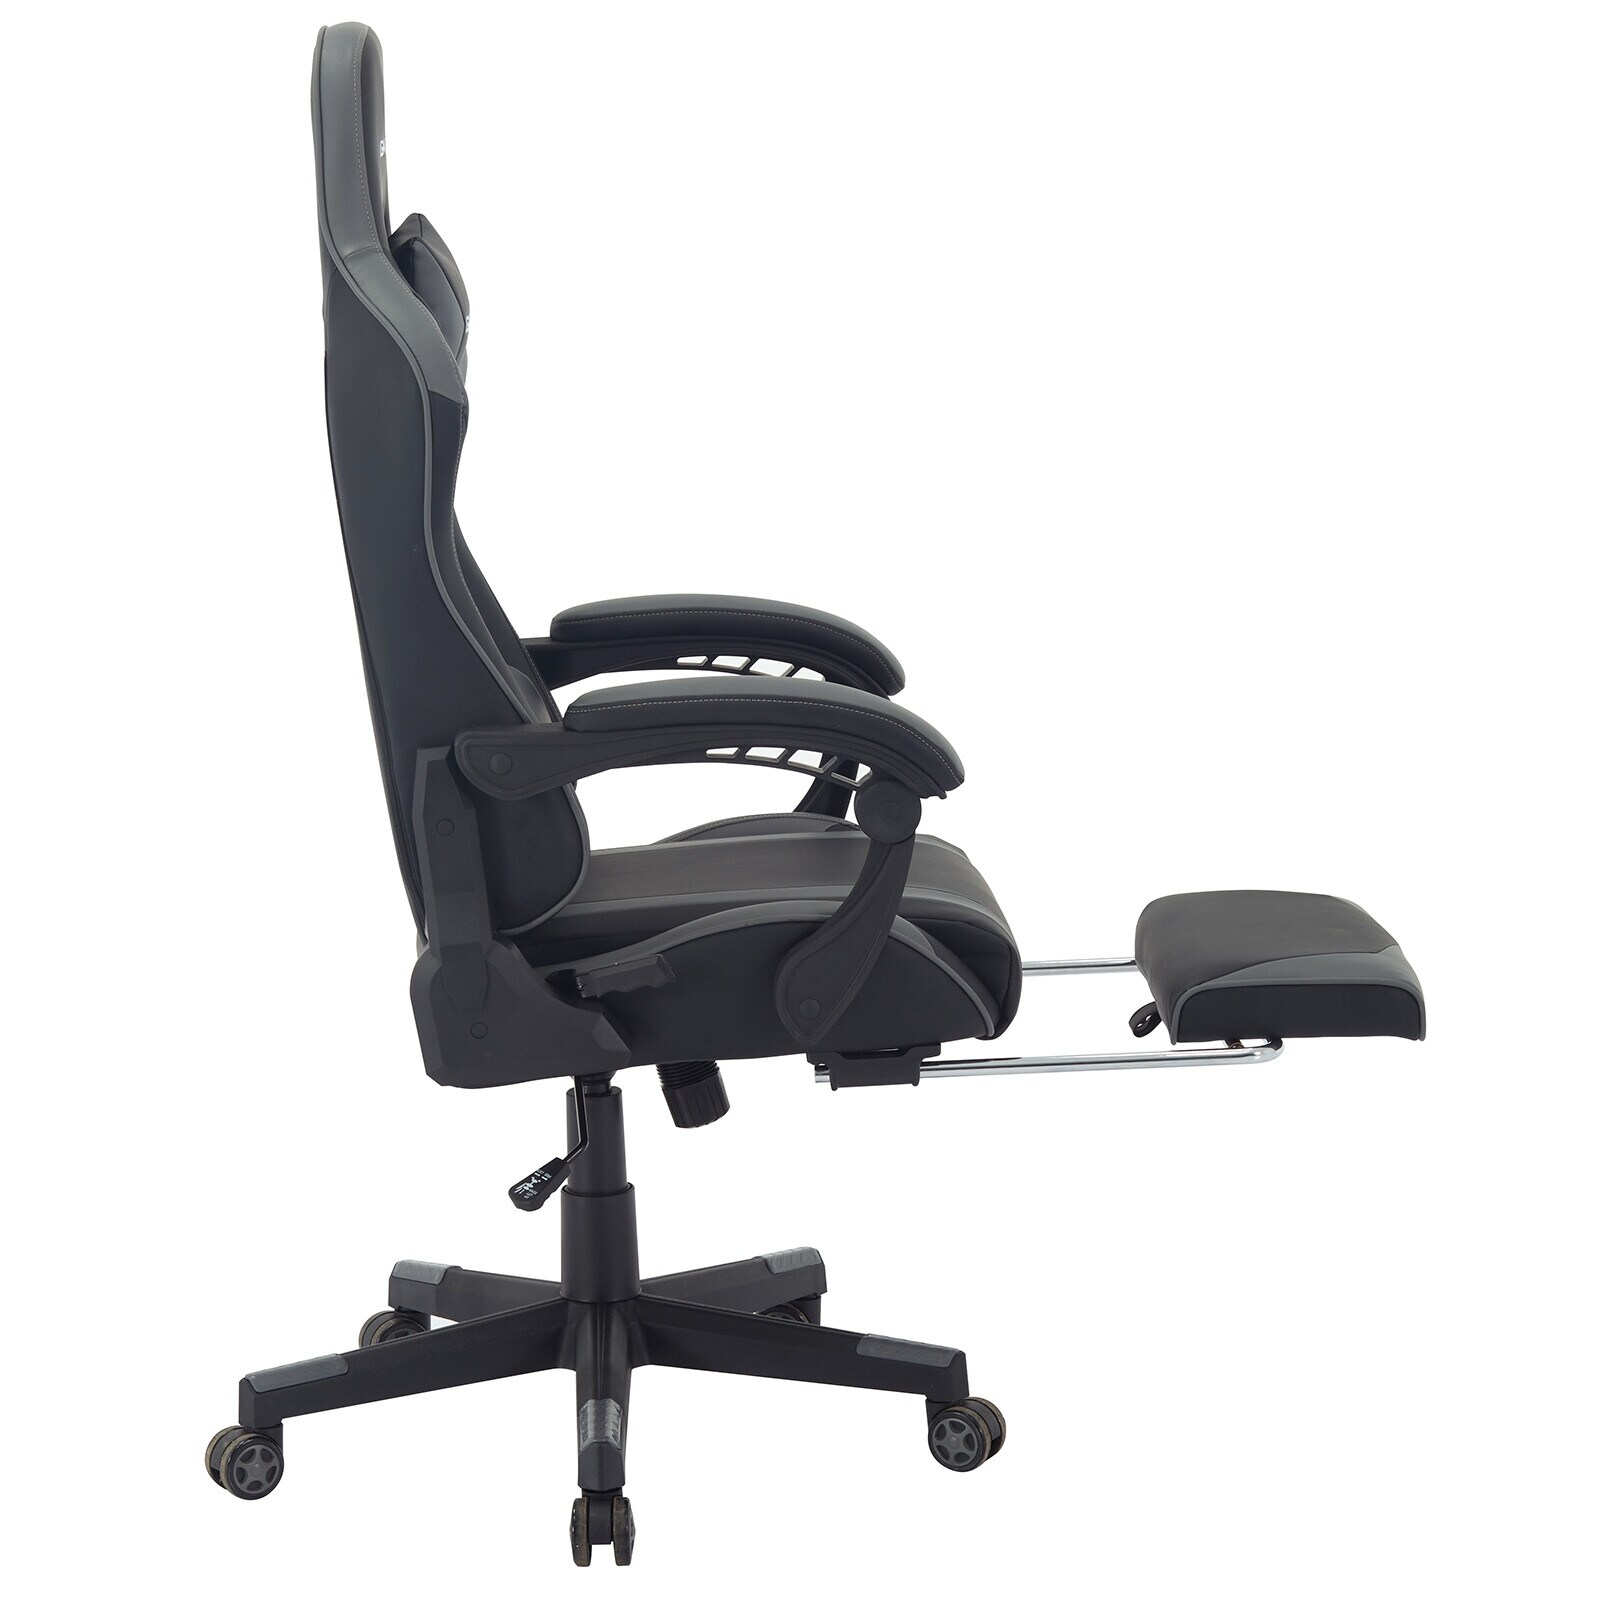 https://ak1.ostkcdn.com/images/products/is/images/direct/308d1069cb7ace4061e32c6b13d219444e5d0f61/Commodore-Gaming-Chair-Ergonomic-Adjustable-Height-Swivel-Recliner-with-Adjustable-Armrest-and-Retractable-Footrest.jpg